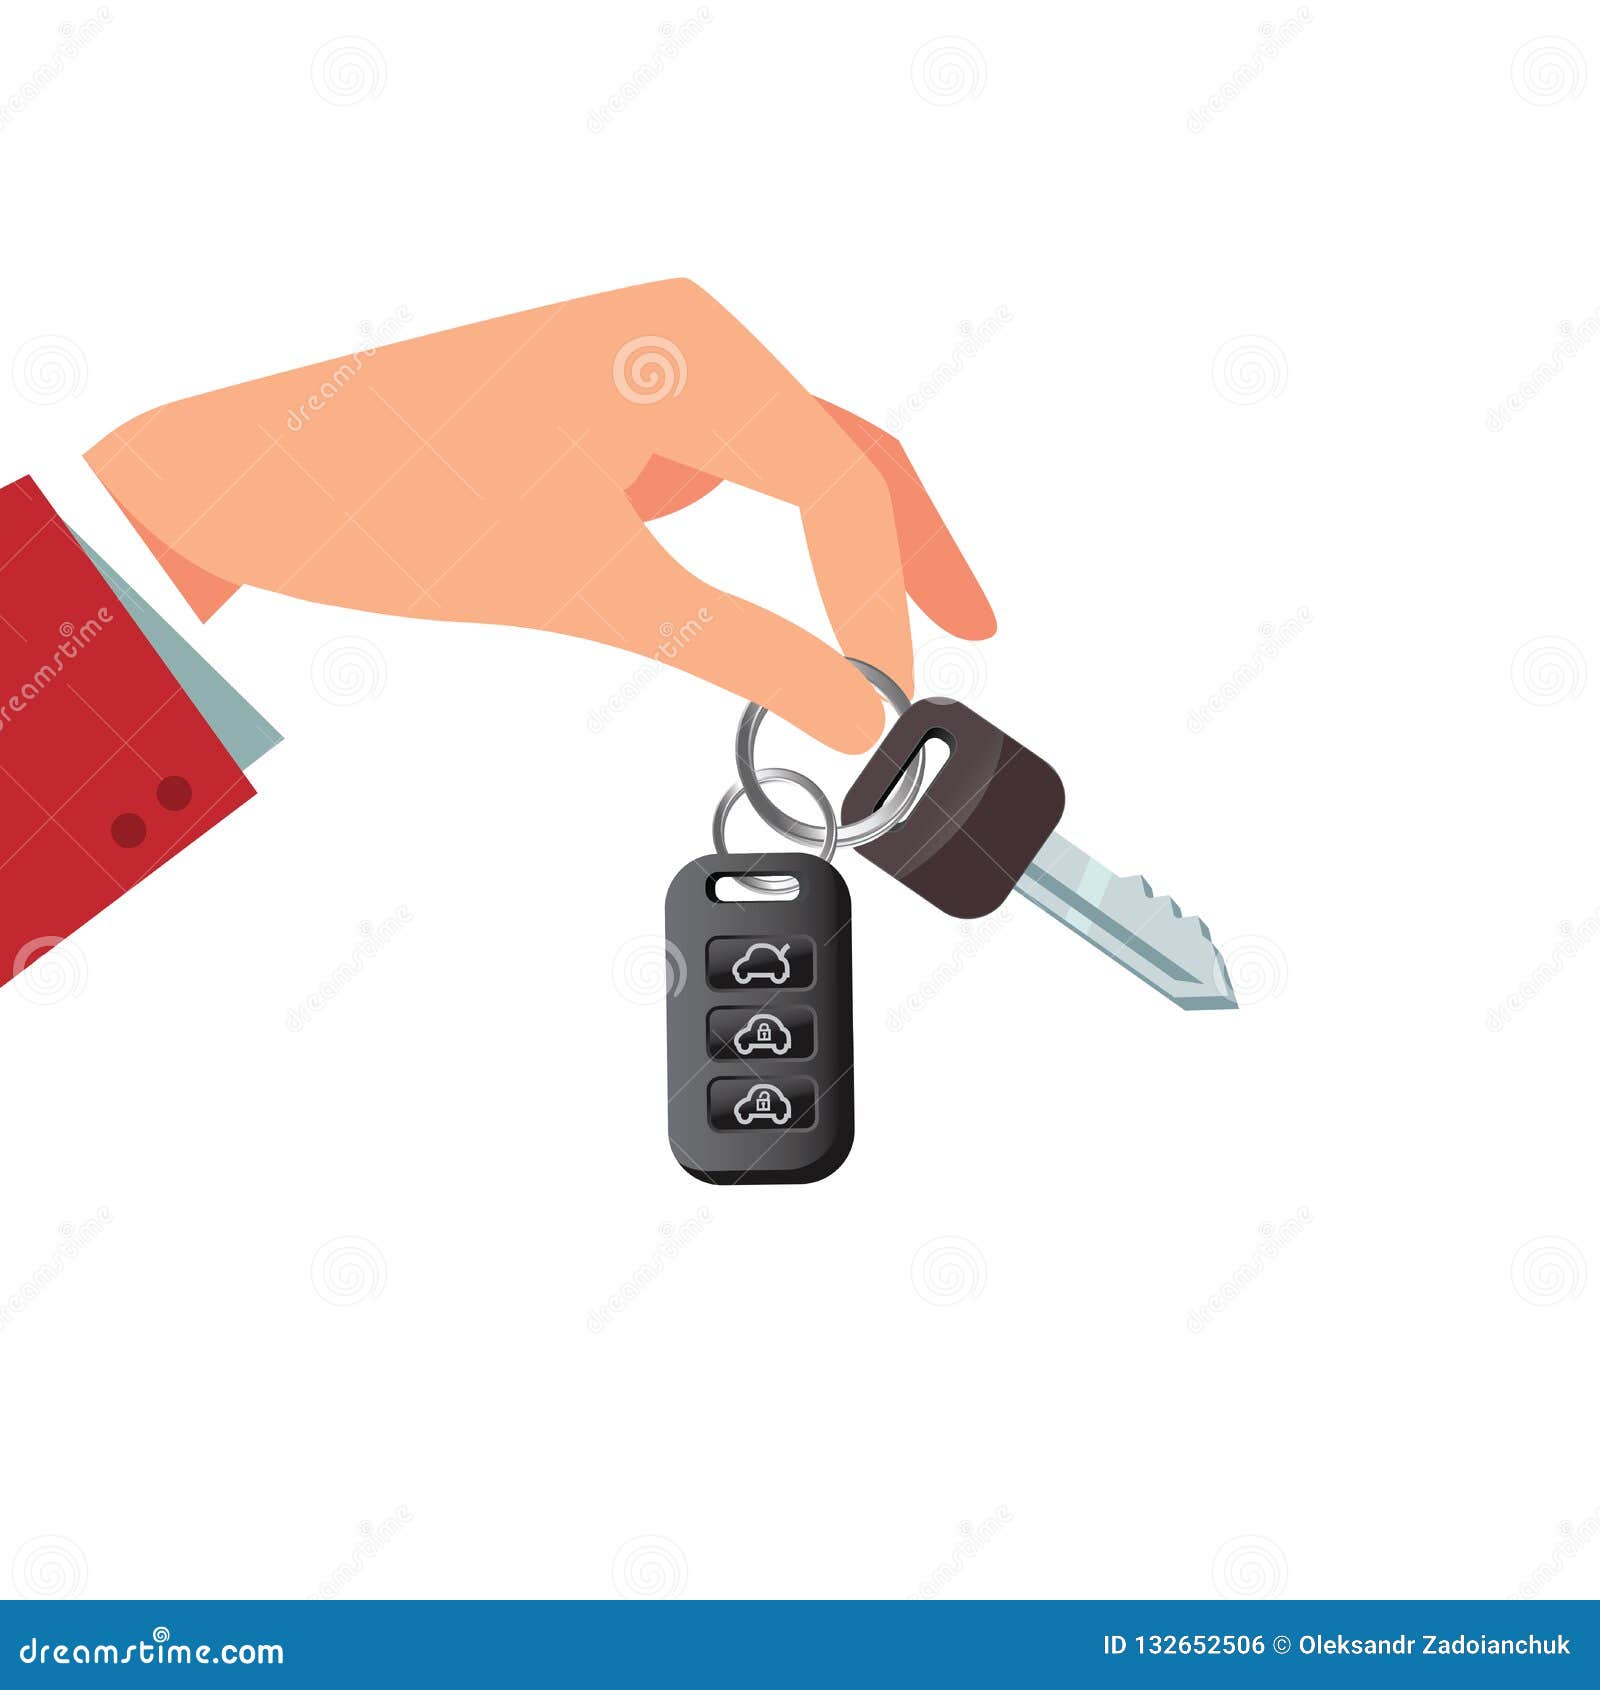 R Car Rental or Sale Concept in Flat Style - Hand Holding Car Key Stock ...